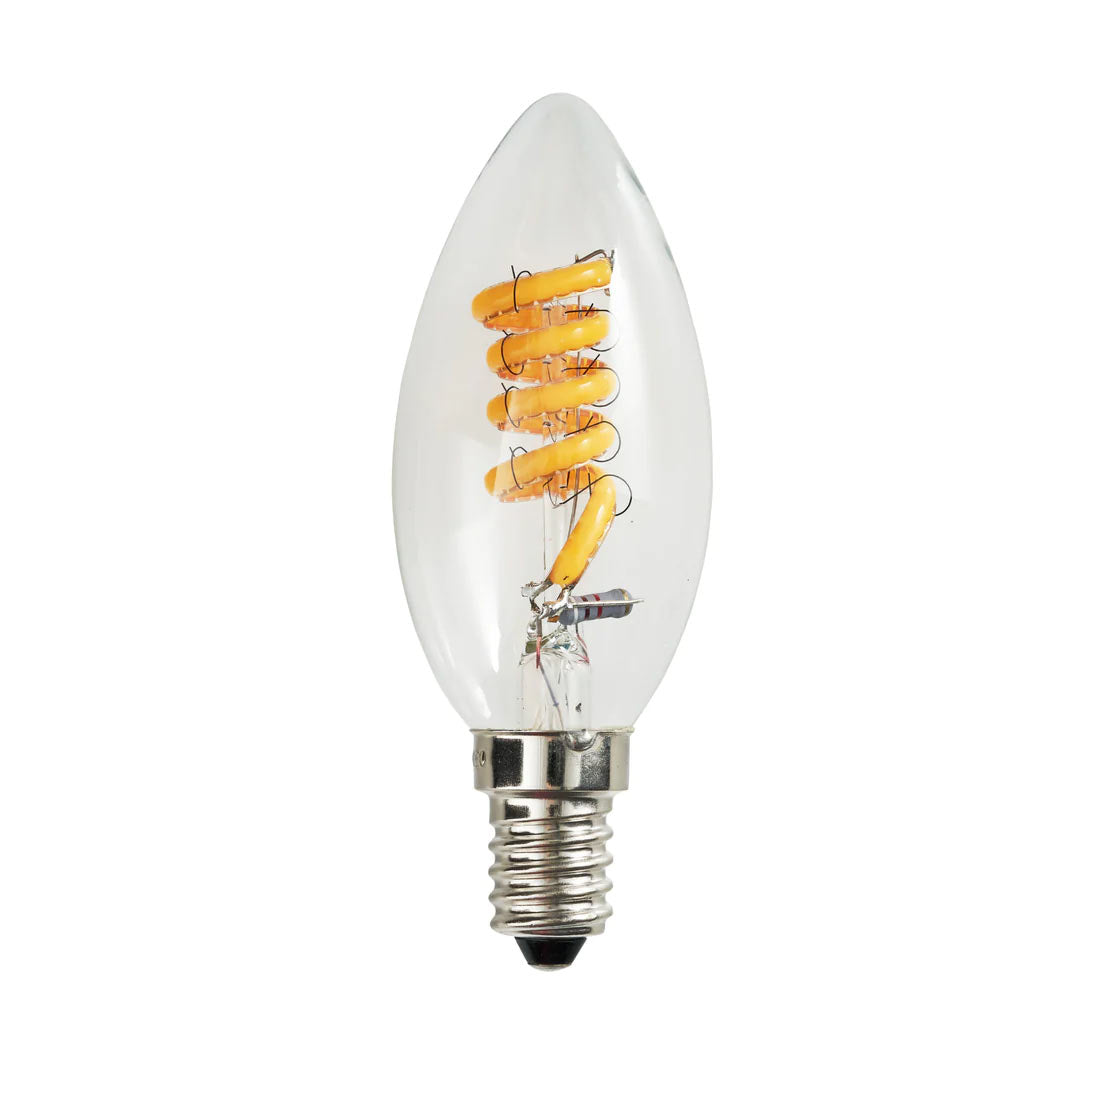 Anko Dim To Warm Candle LED Bulb E14 sold by South Charlotte Fine Lighting